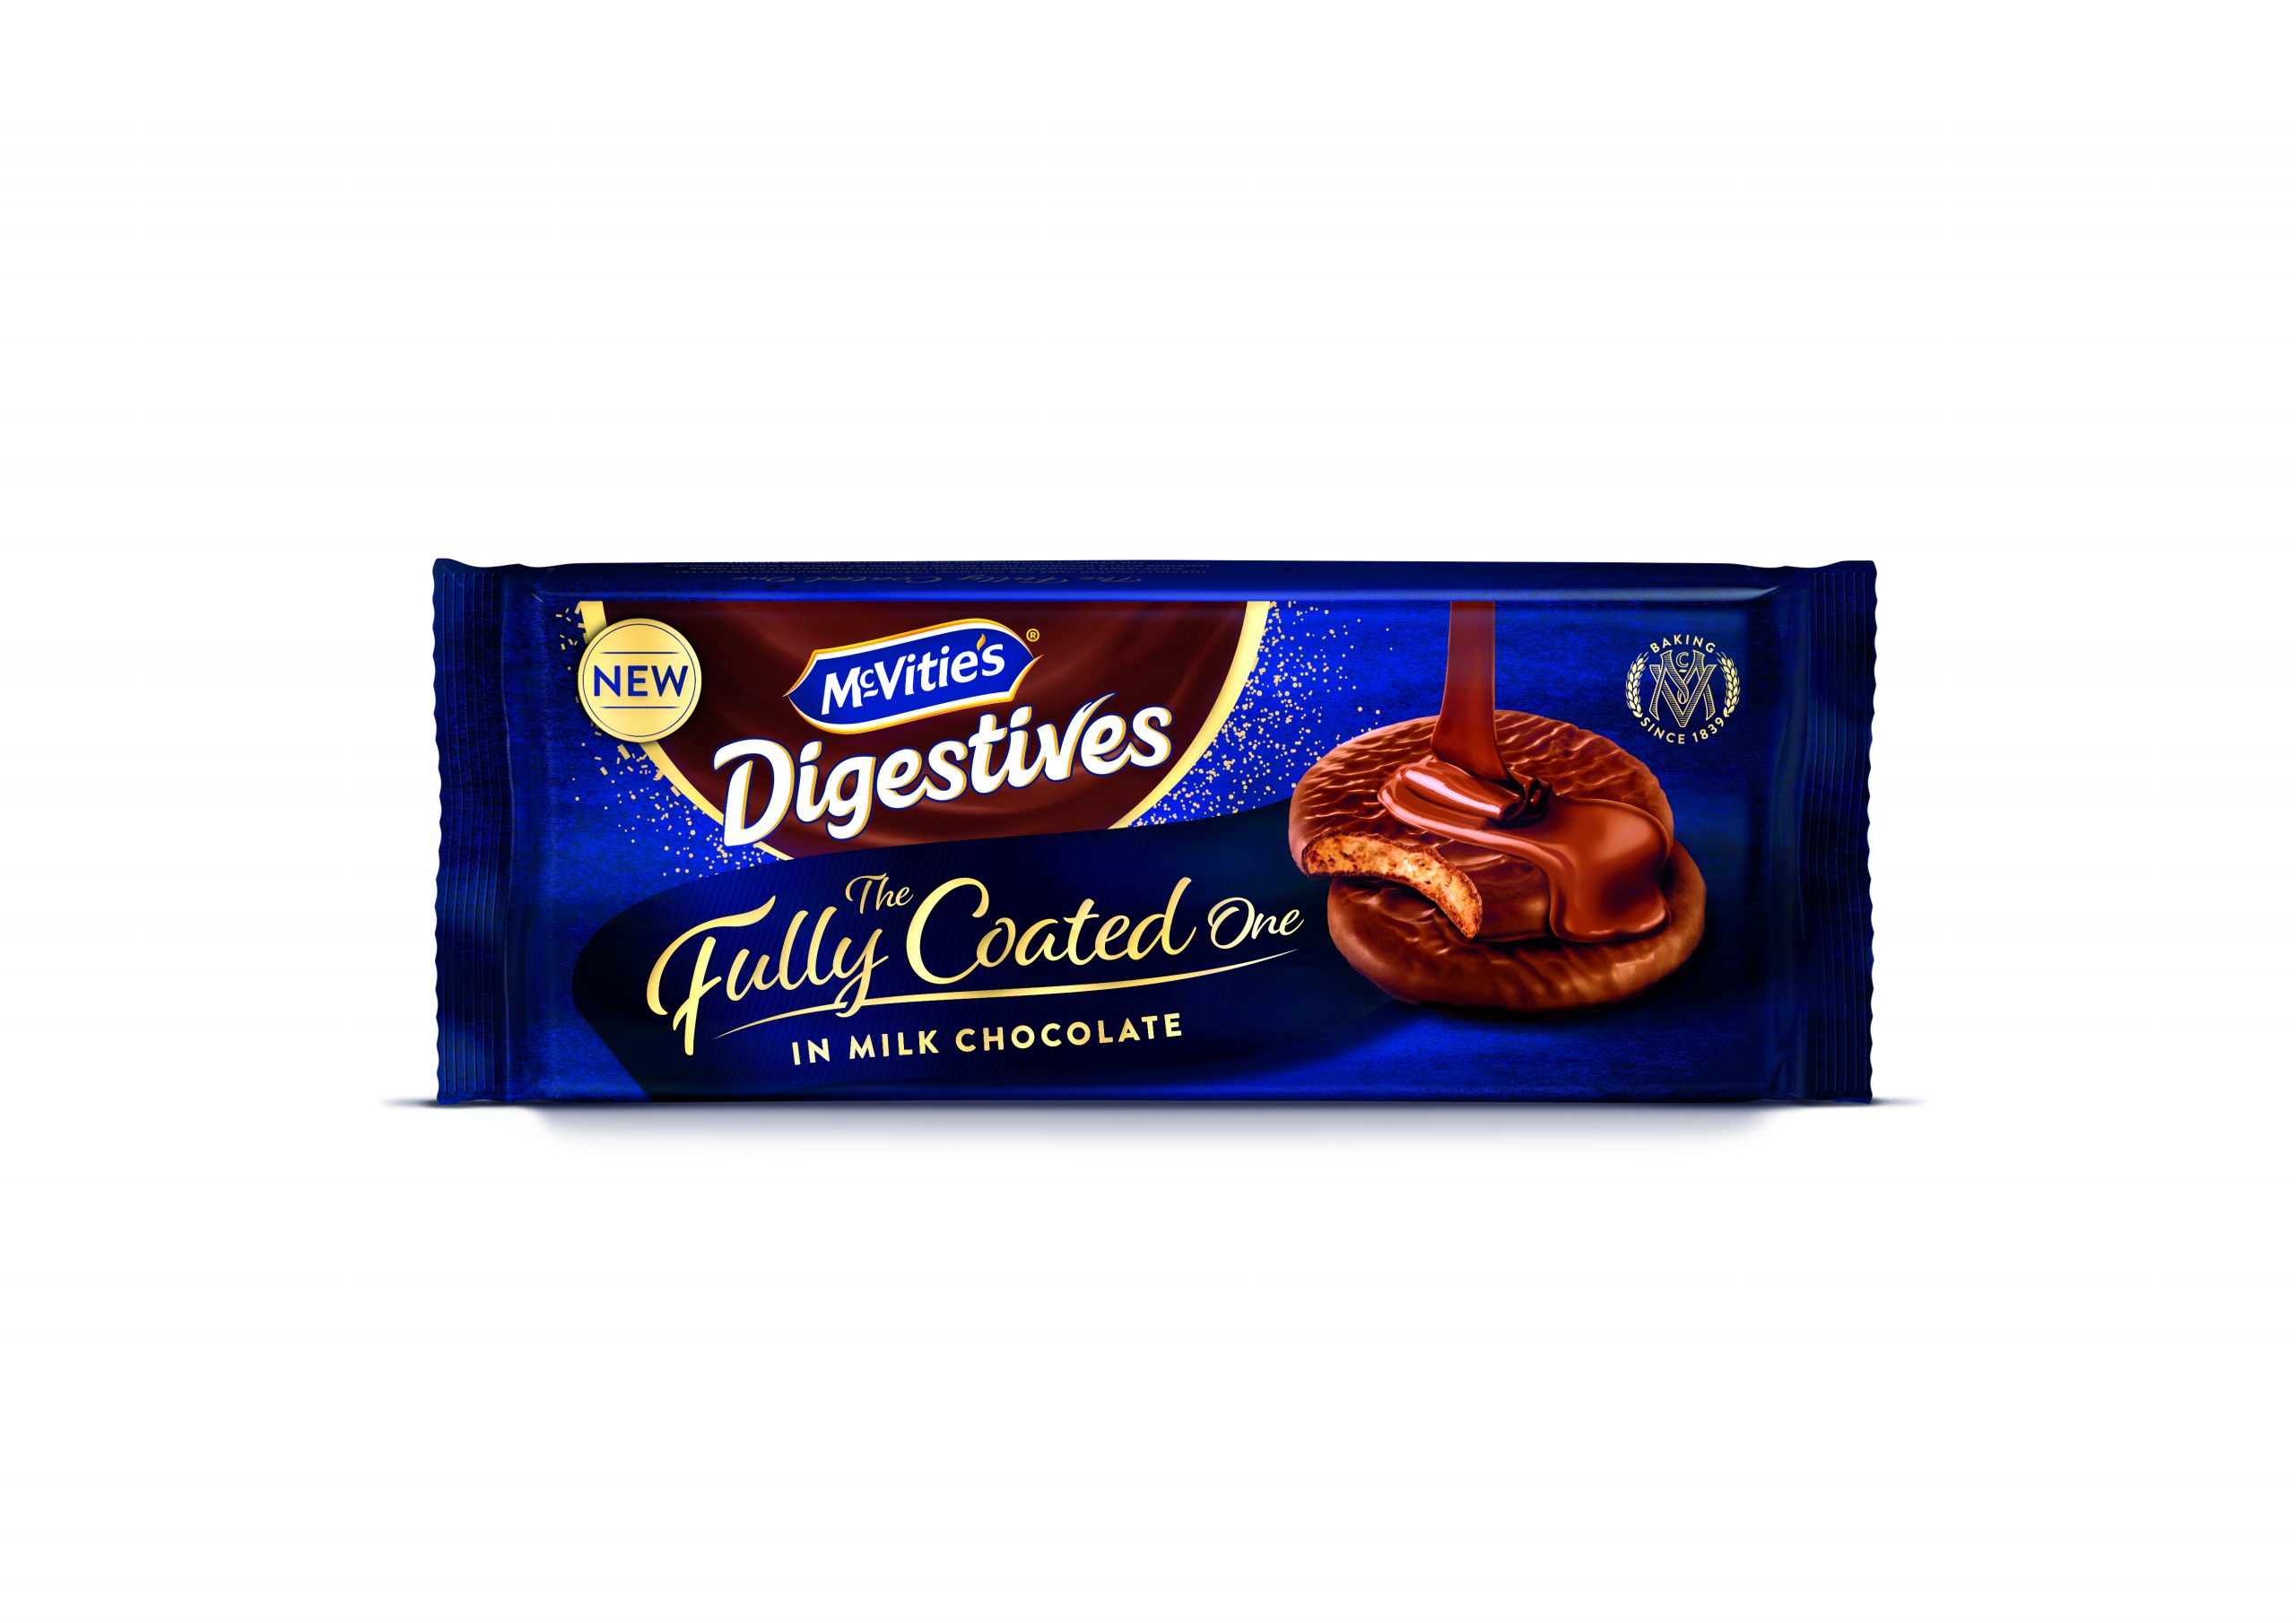 pladis gives McVitie’s bestsellers indulgent makeover